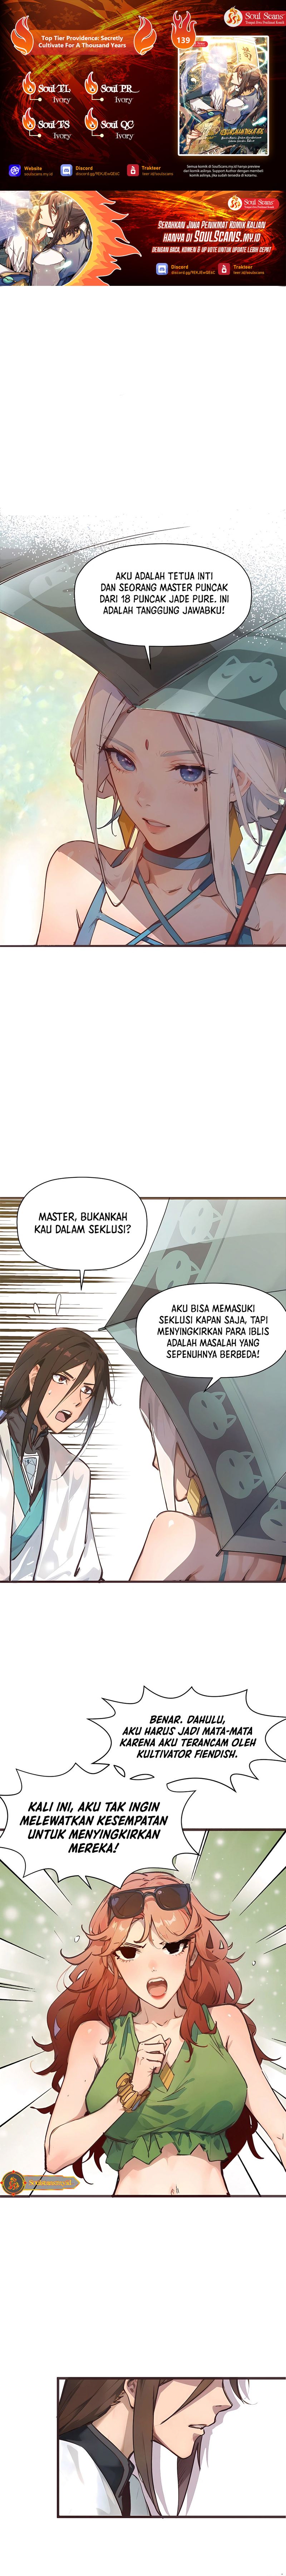 Dilarang COPAS - situs resmi www.mangacanblog.com - Komik top tier providence secretly cultivate for a thousand years 139 - chapter 139 140 Indonesia top tier providence secretly cultivate for a thousand years 139 - chapter 139 Terbaru 0|Baca Manga Komik Indonesia|Mangacan